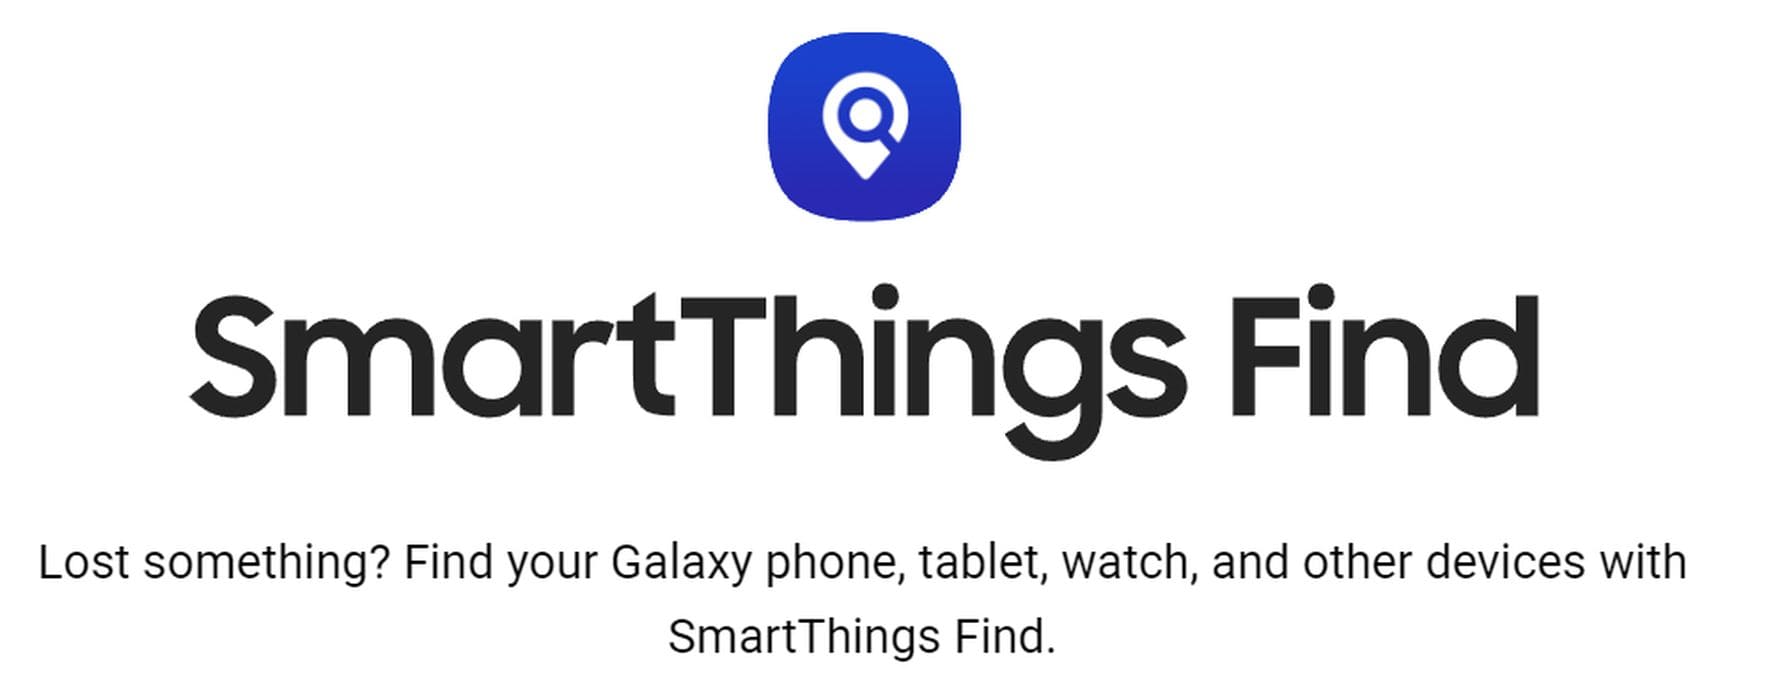 An image of SmartThings Find main picture